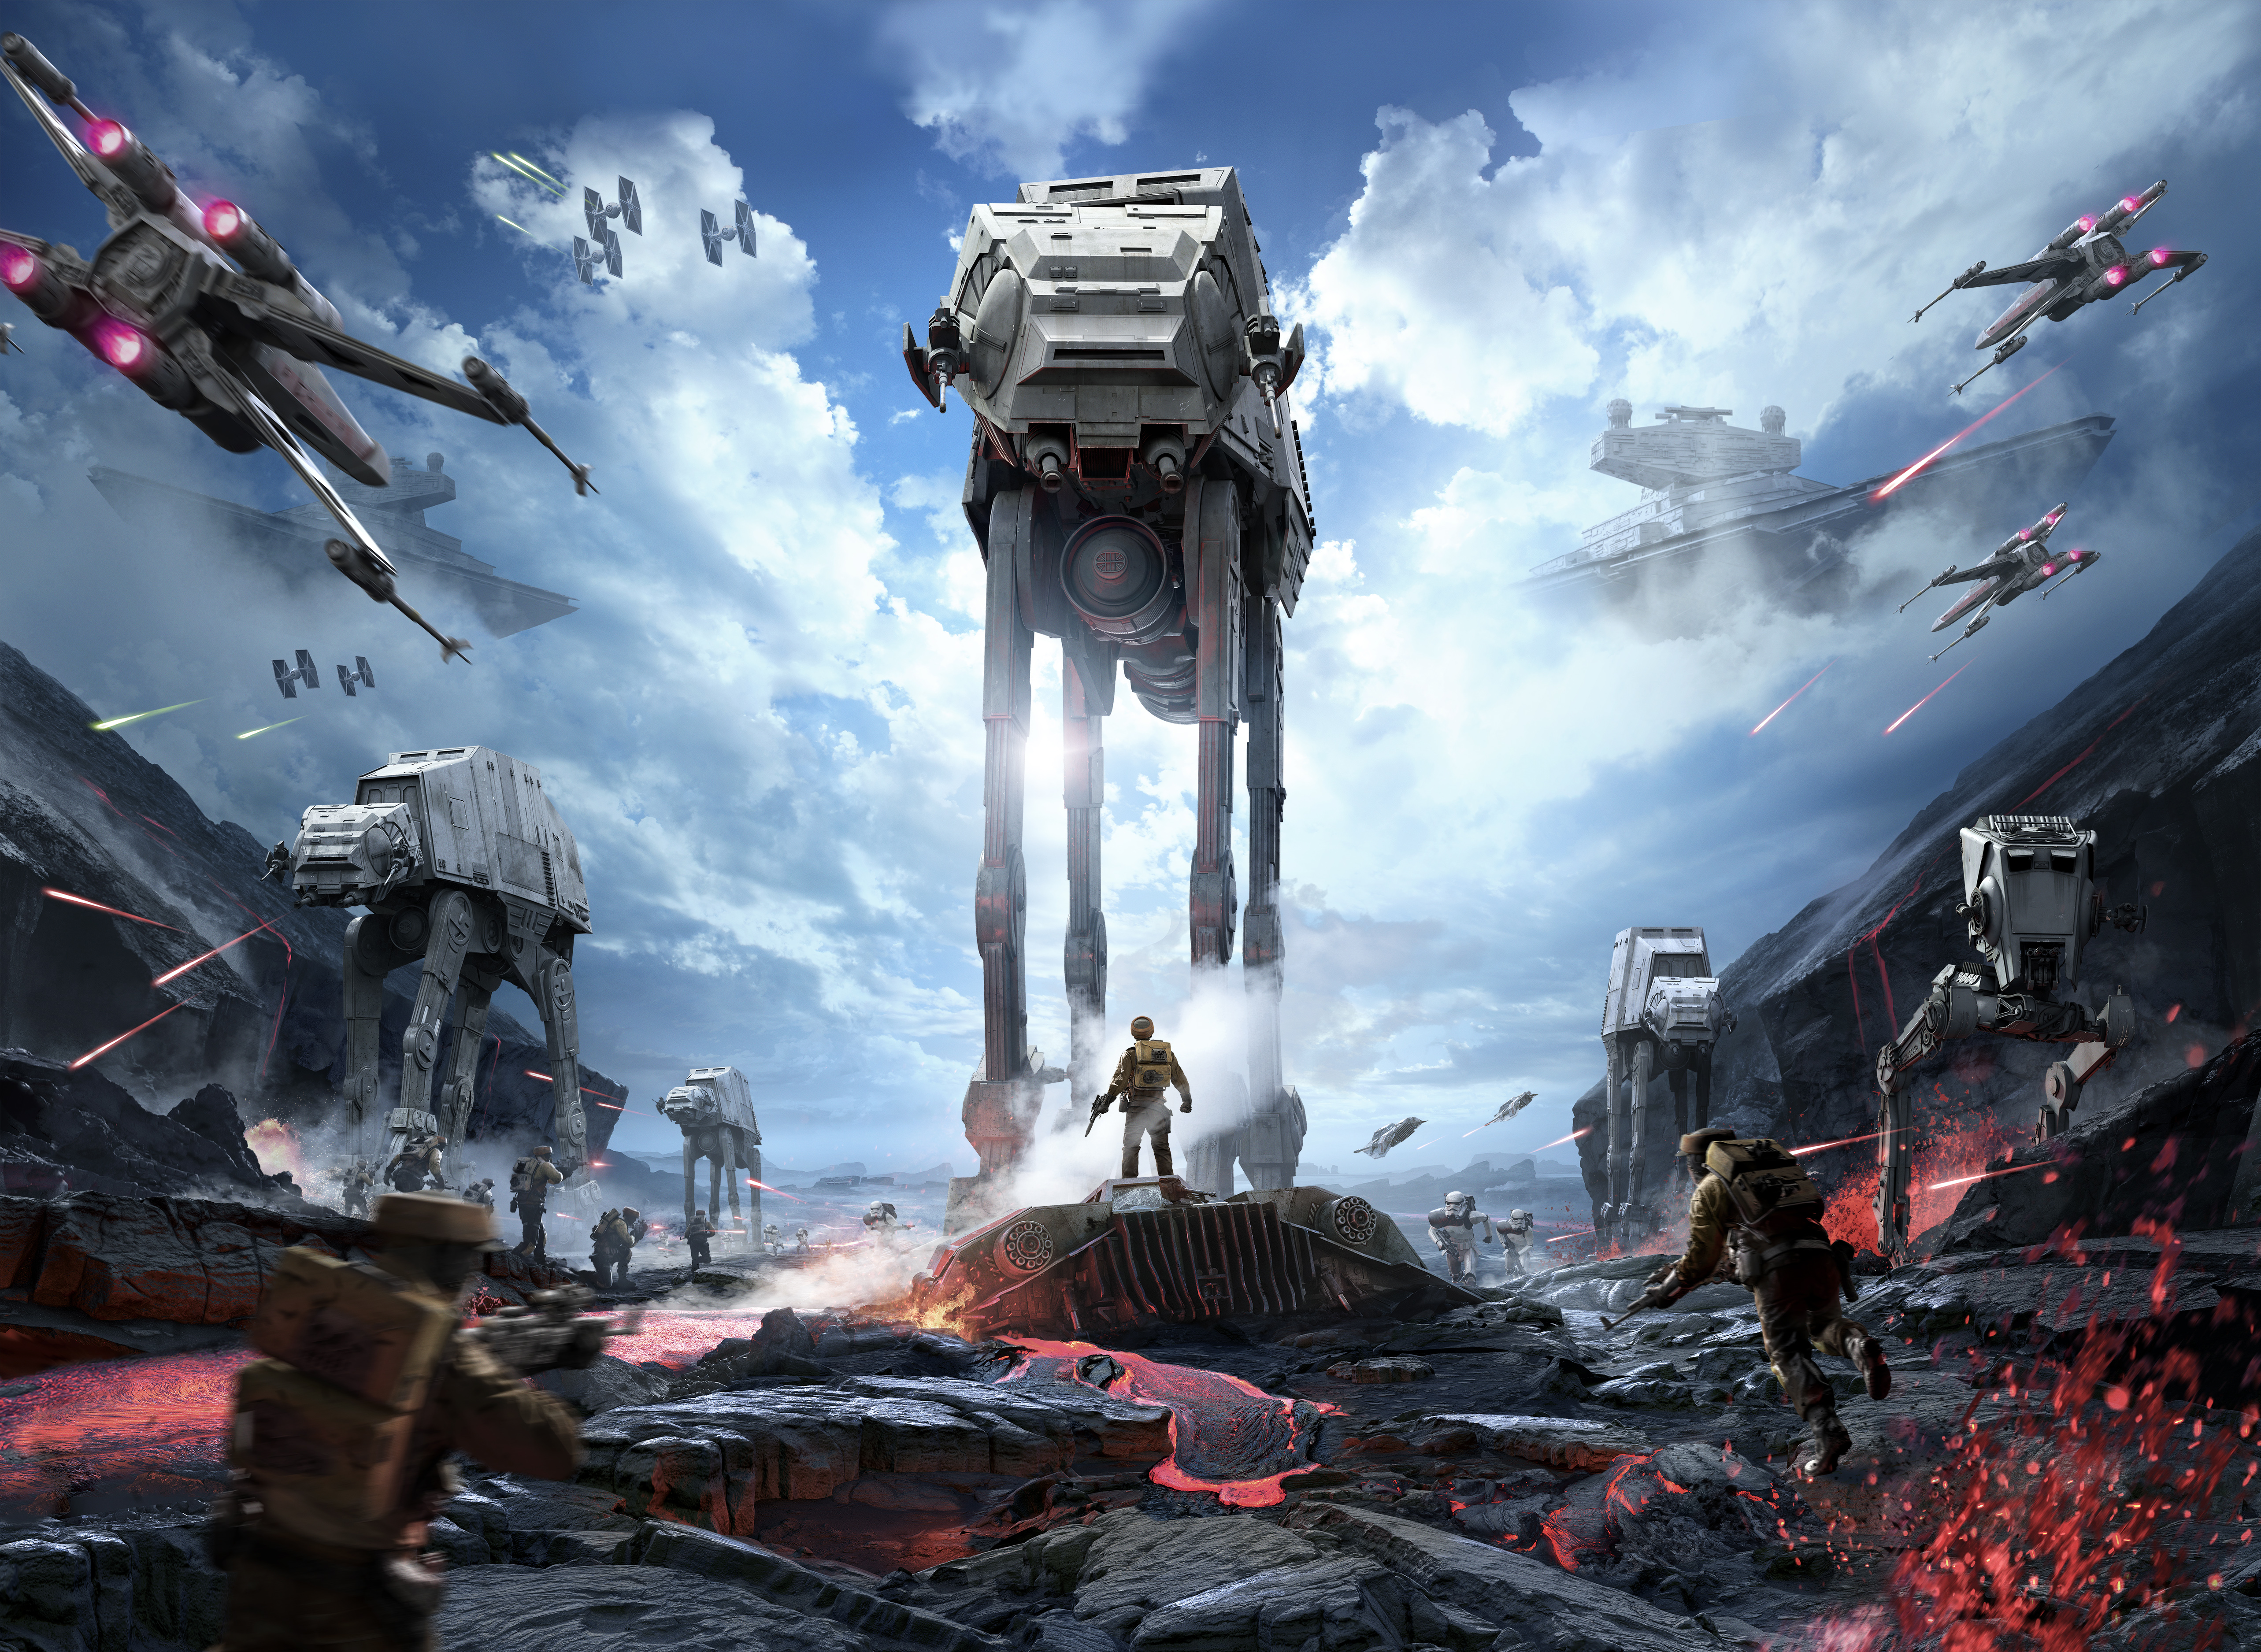 General 5132x3750 Star Wars: Battlefront video games Star Wars AT-AT X-wing Imperial Forces clouds sky technology running soldier video game art